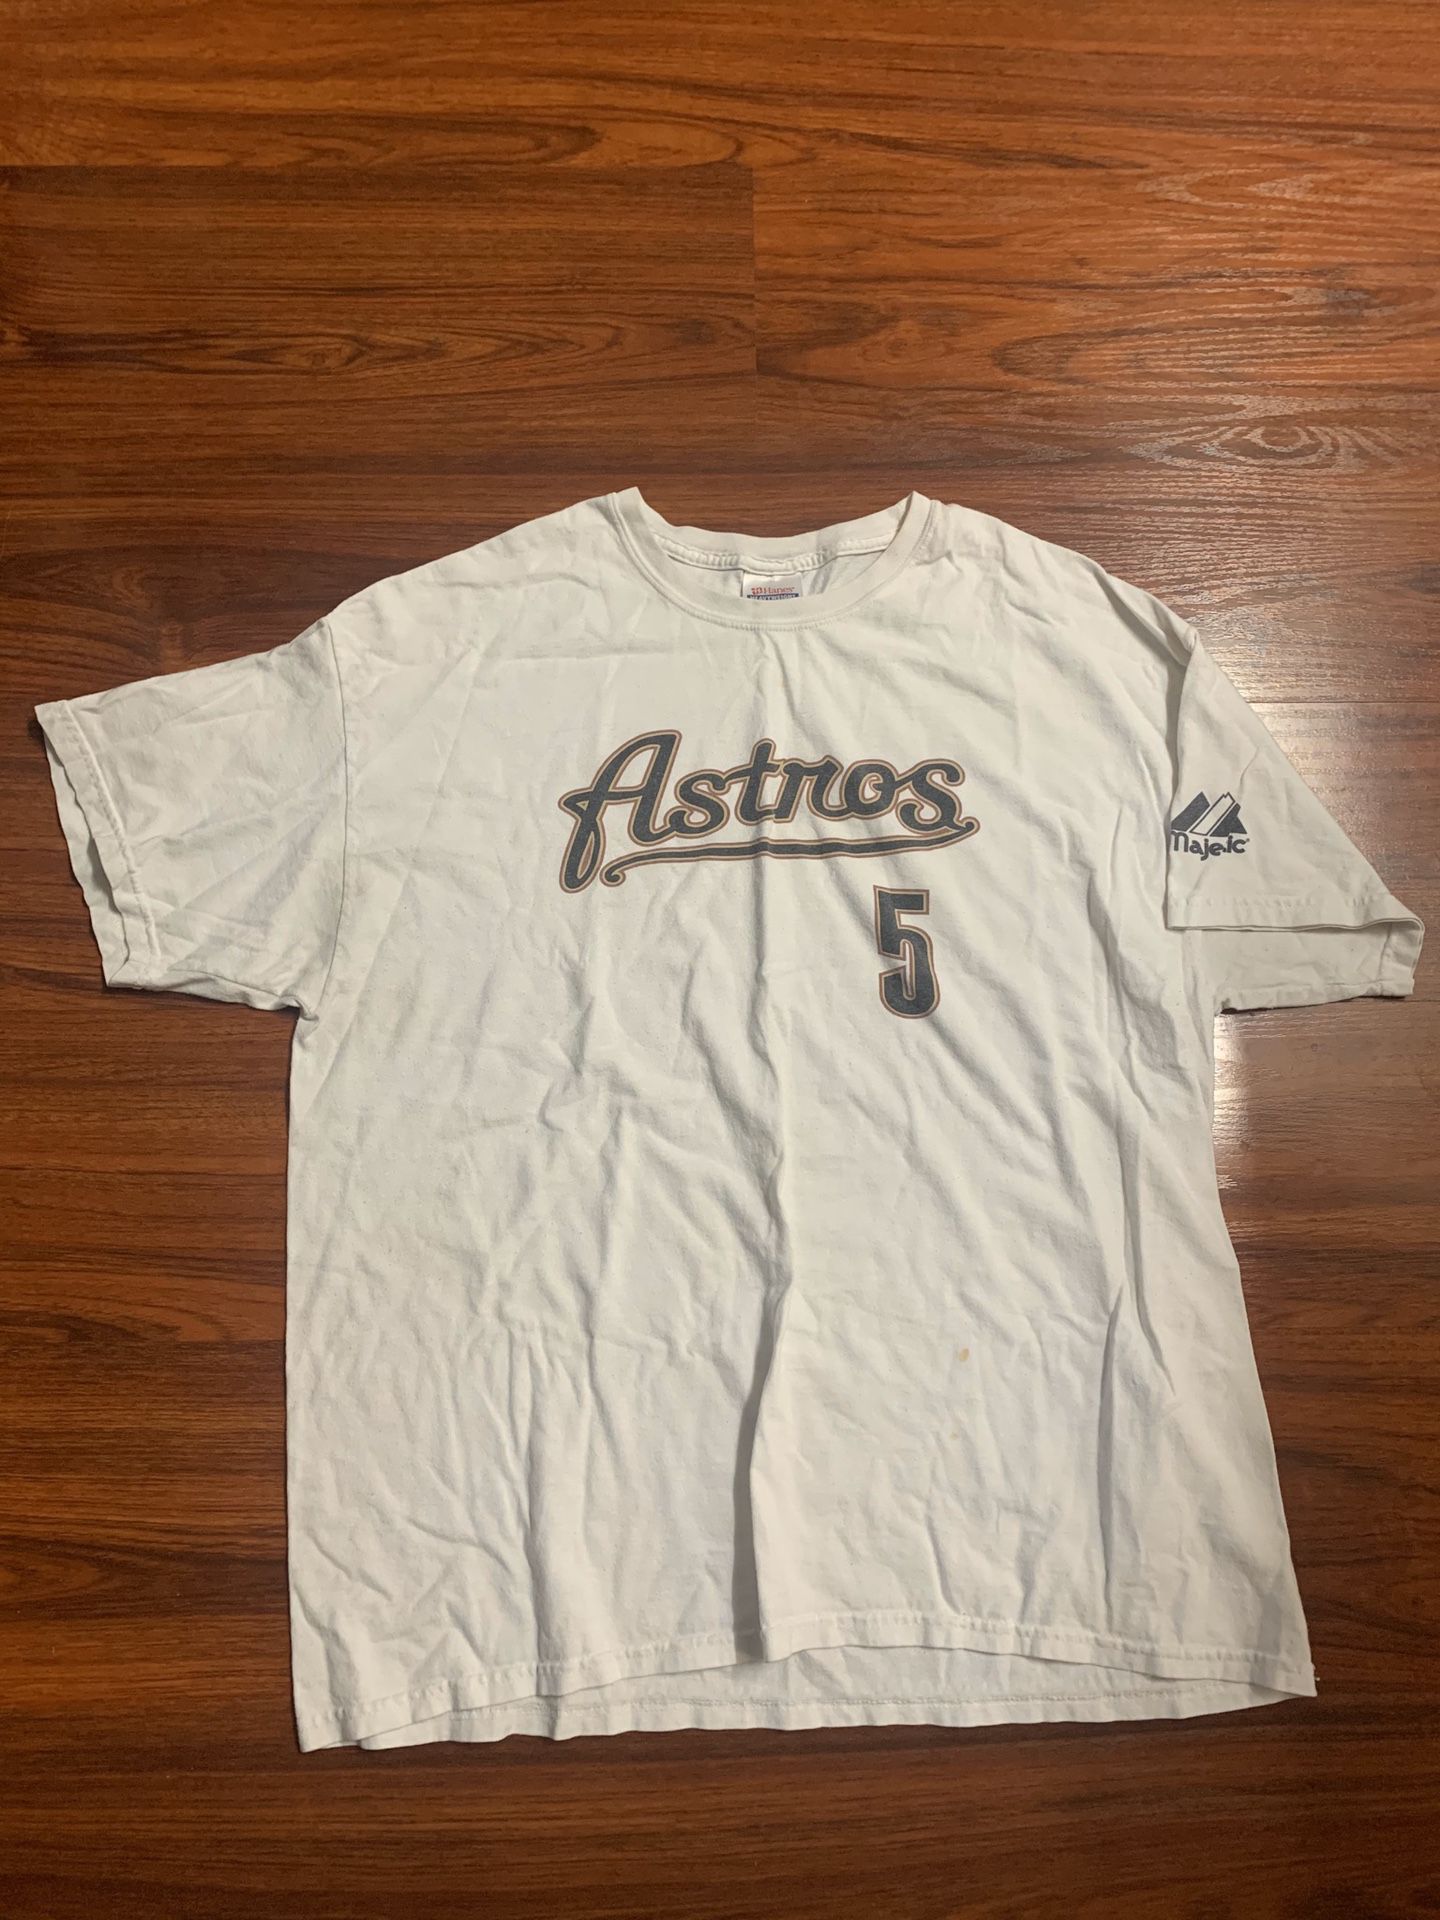 Houston Astros Jeff Bagwell T-Shirt for Sale in Houston, TX - OfferUp